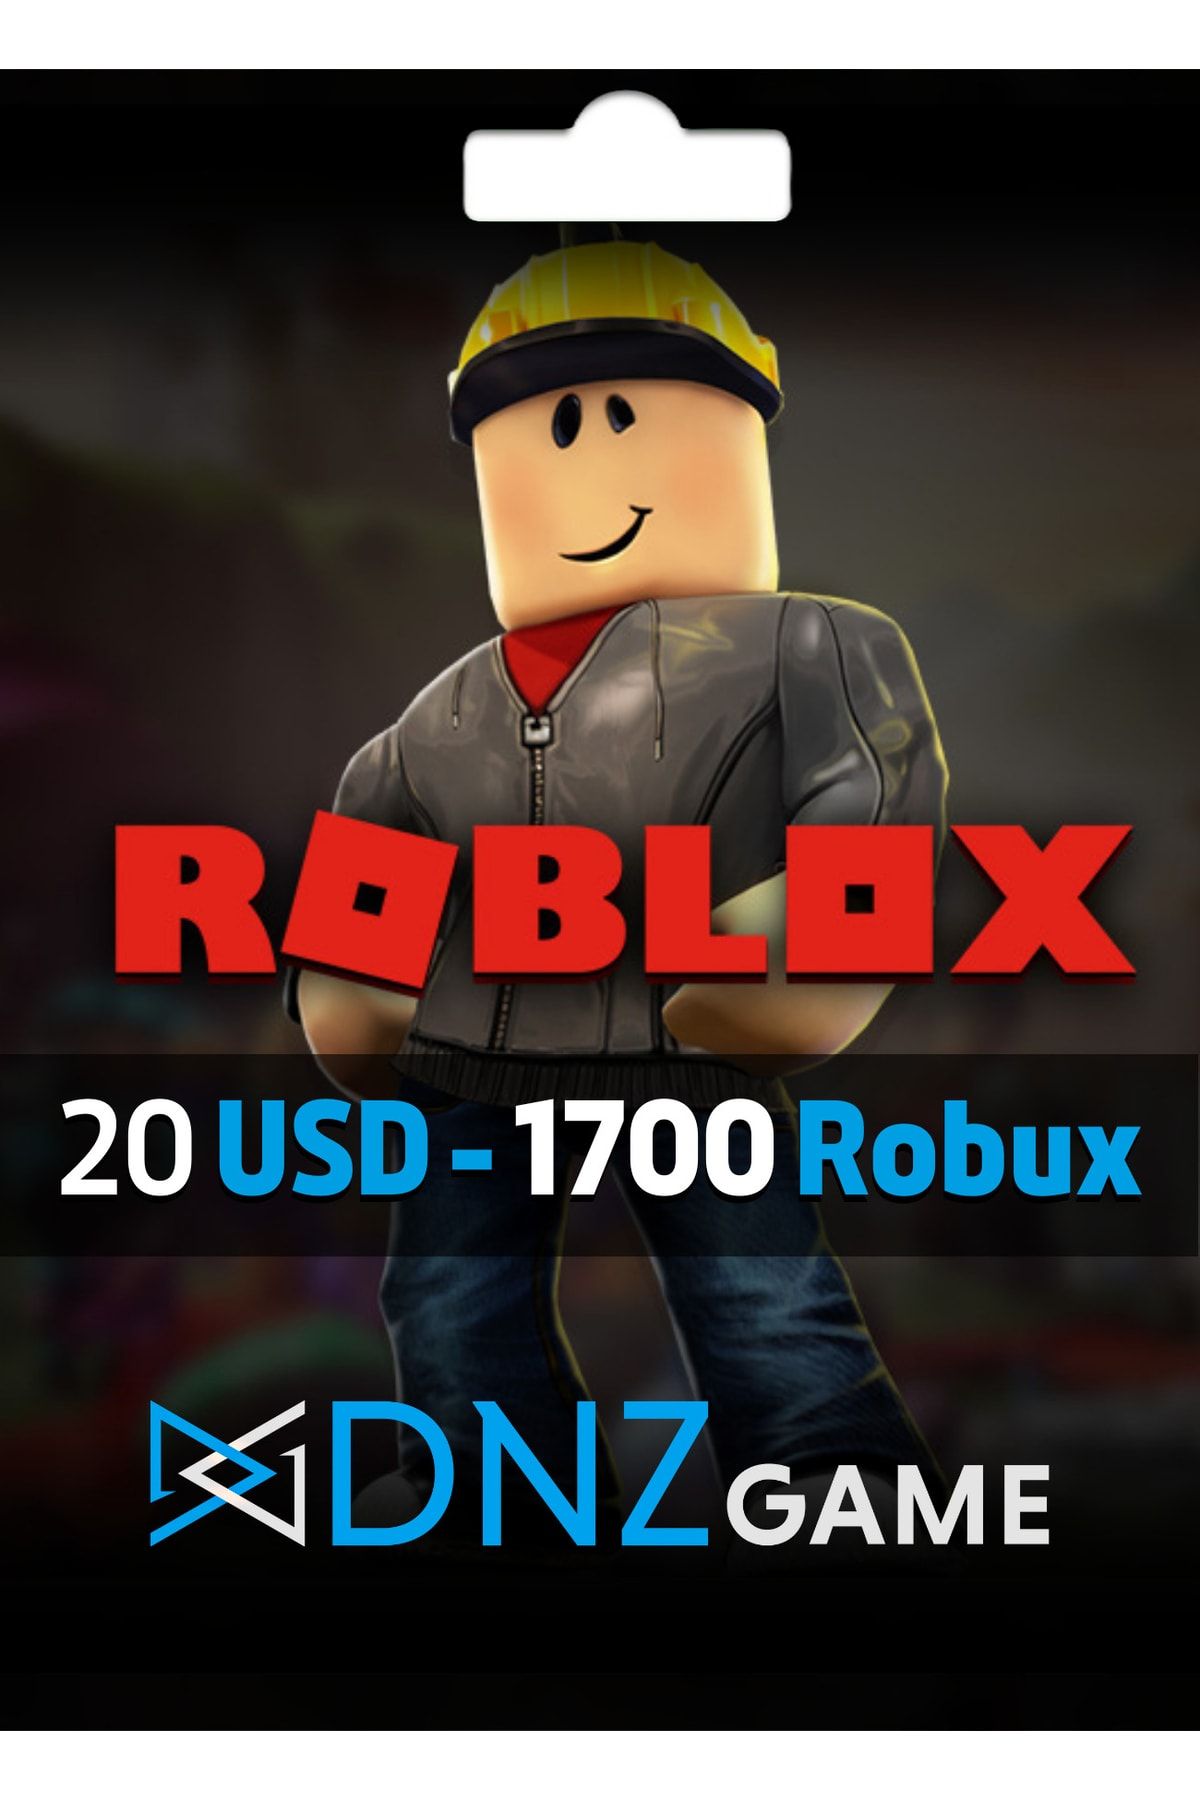 Roblox Gift Card 20 Usd 1700 Robux